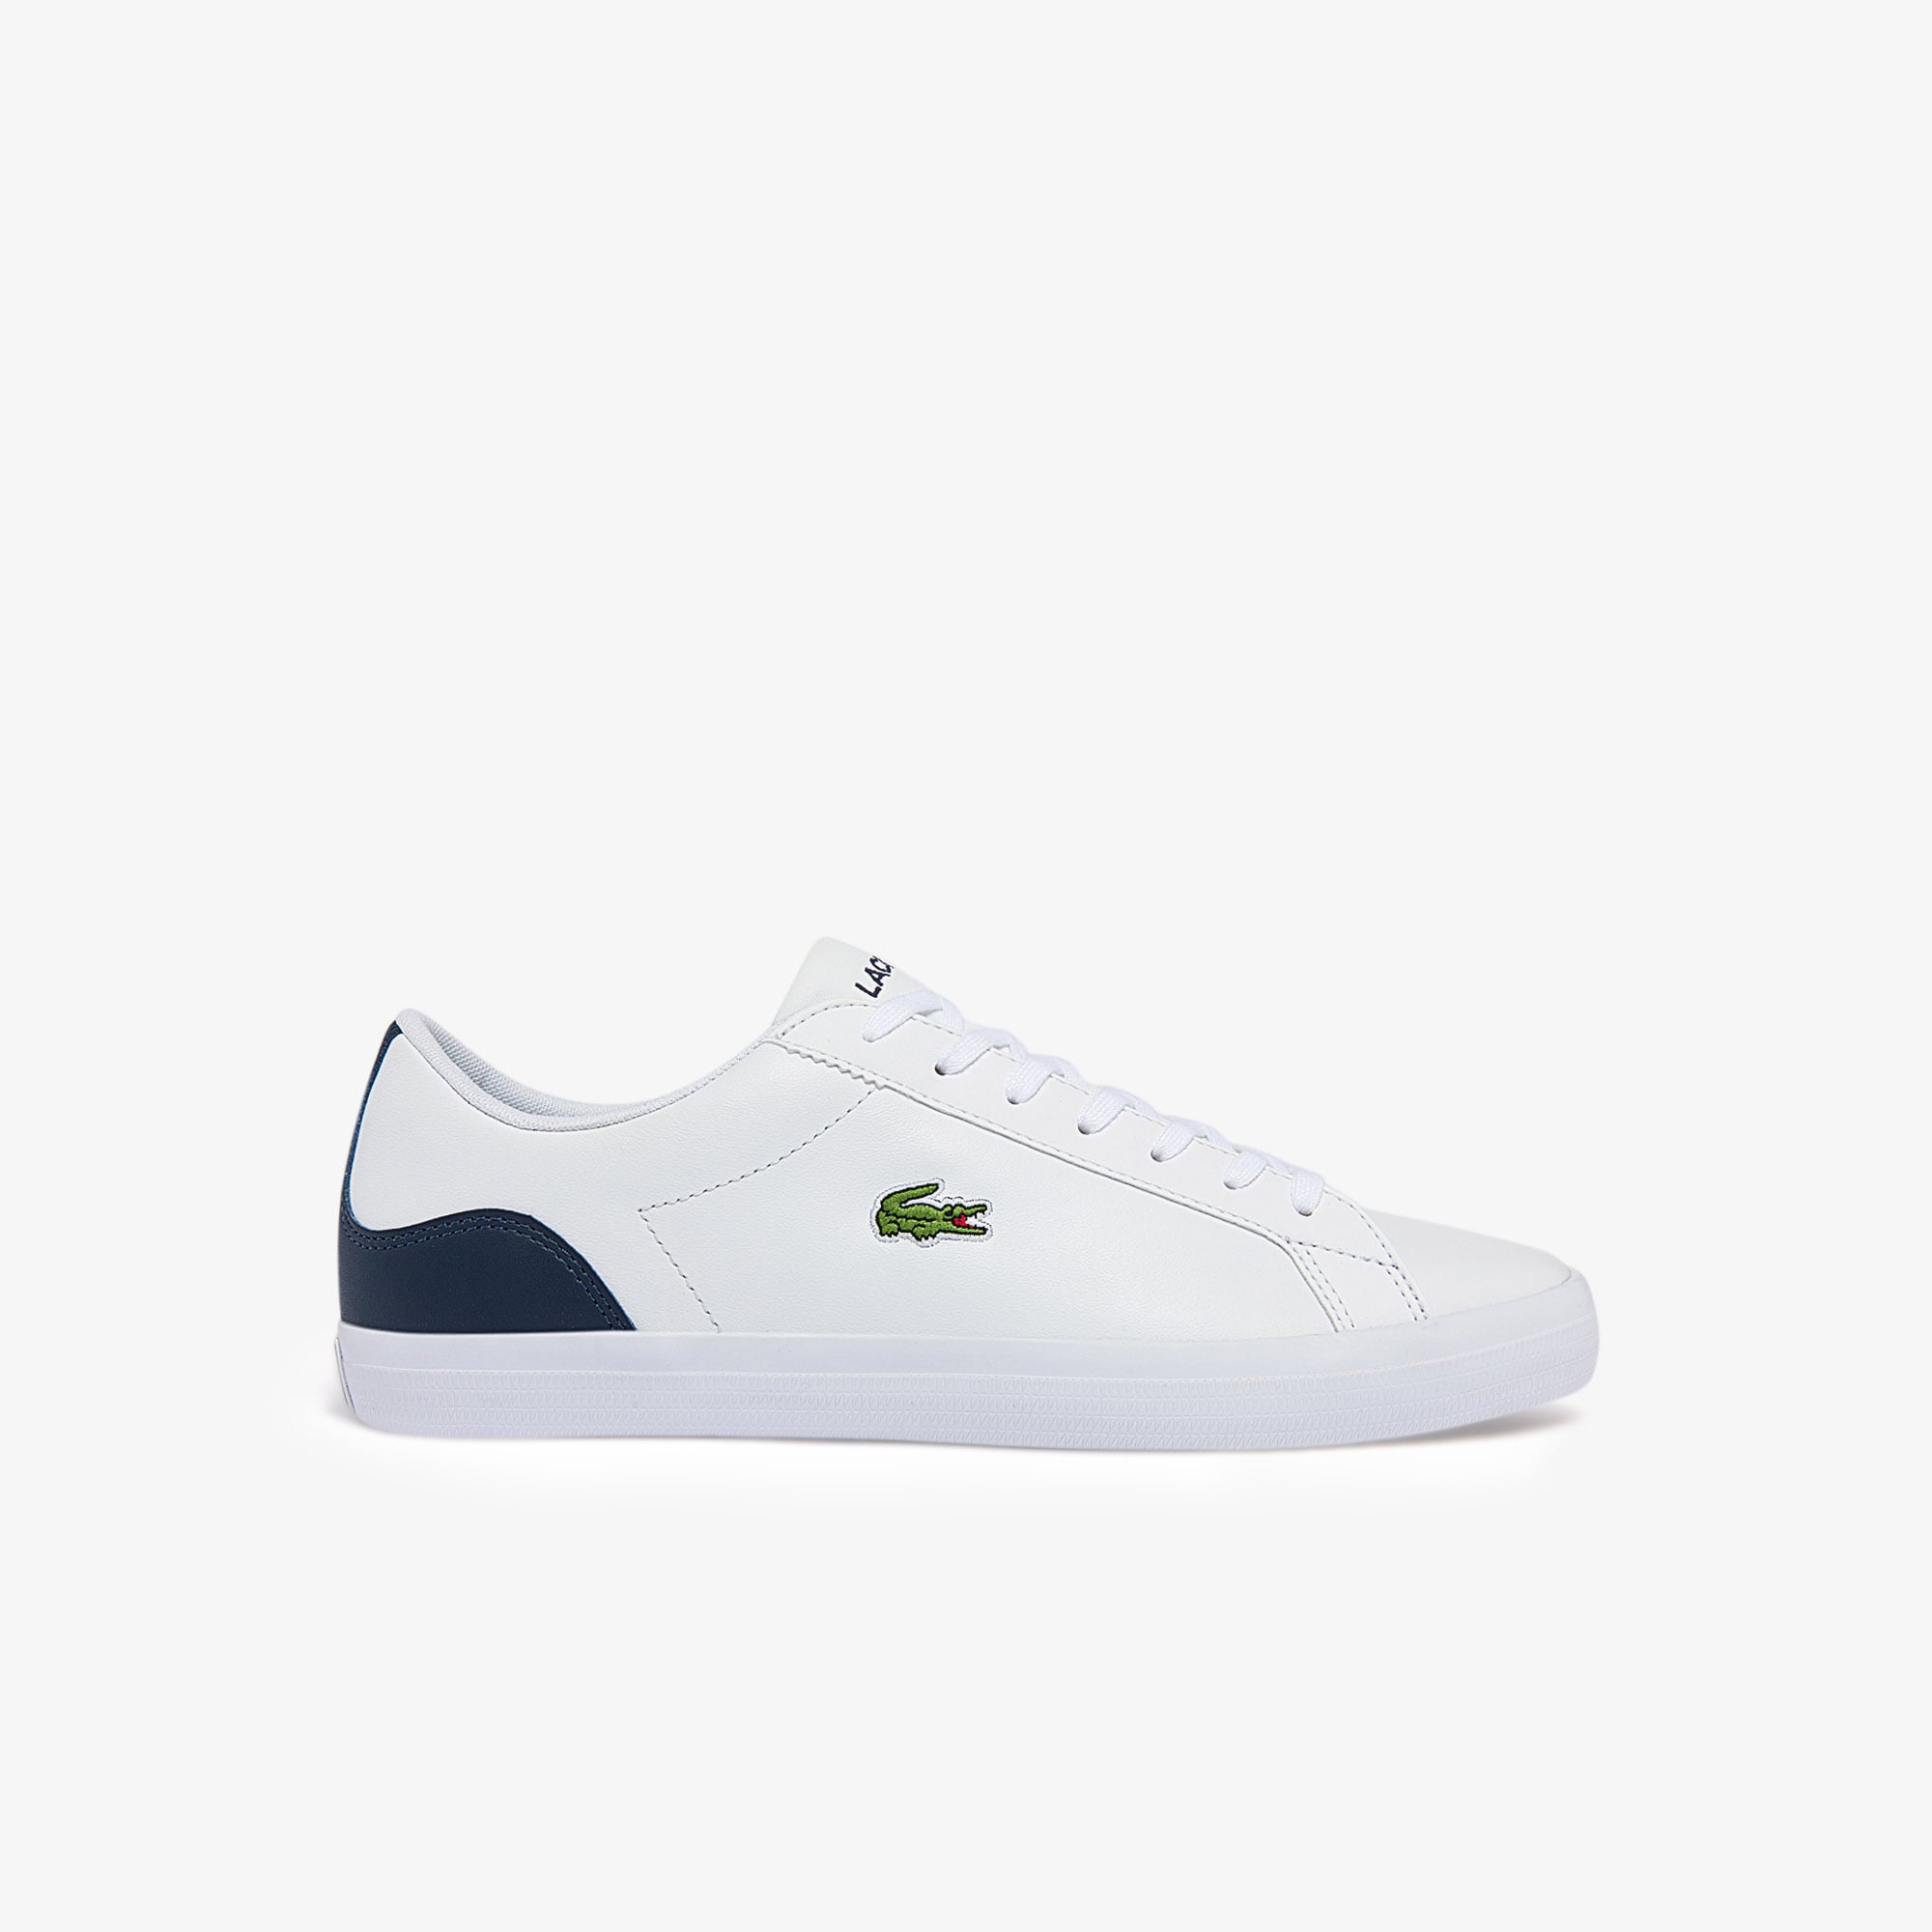 Lacoste Men's Lerond Leather and Synthetic Trainers Size 12 UK White & Navy